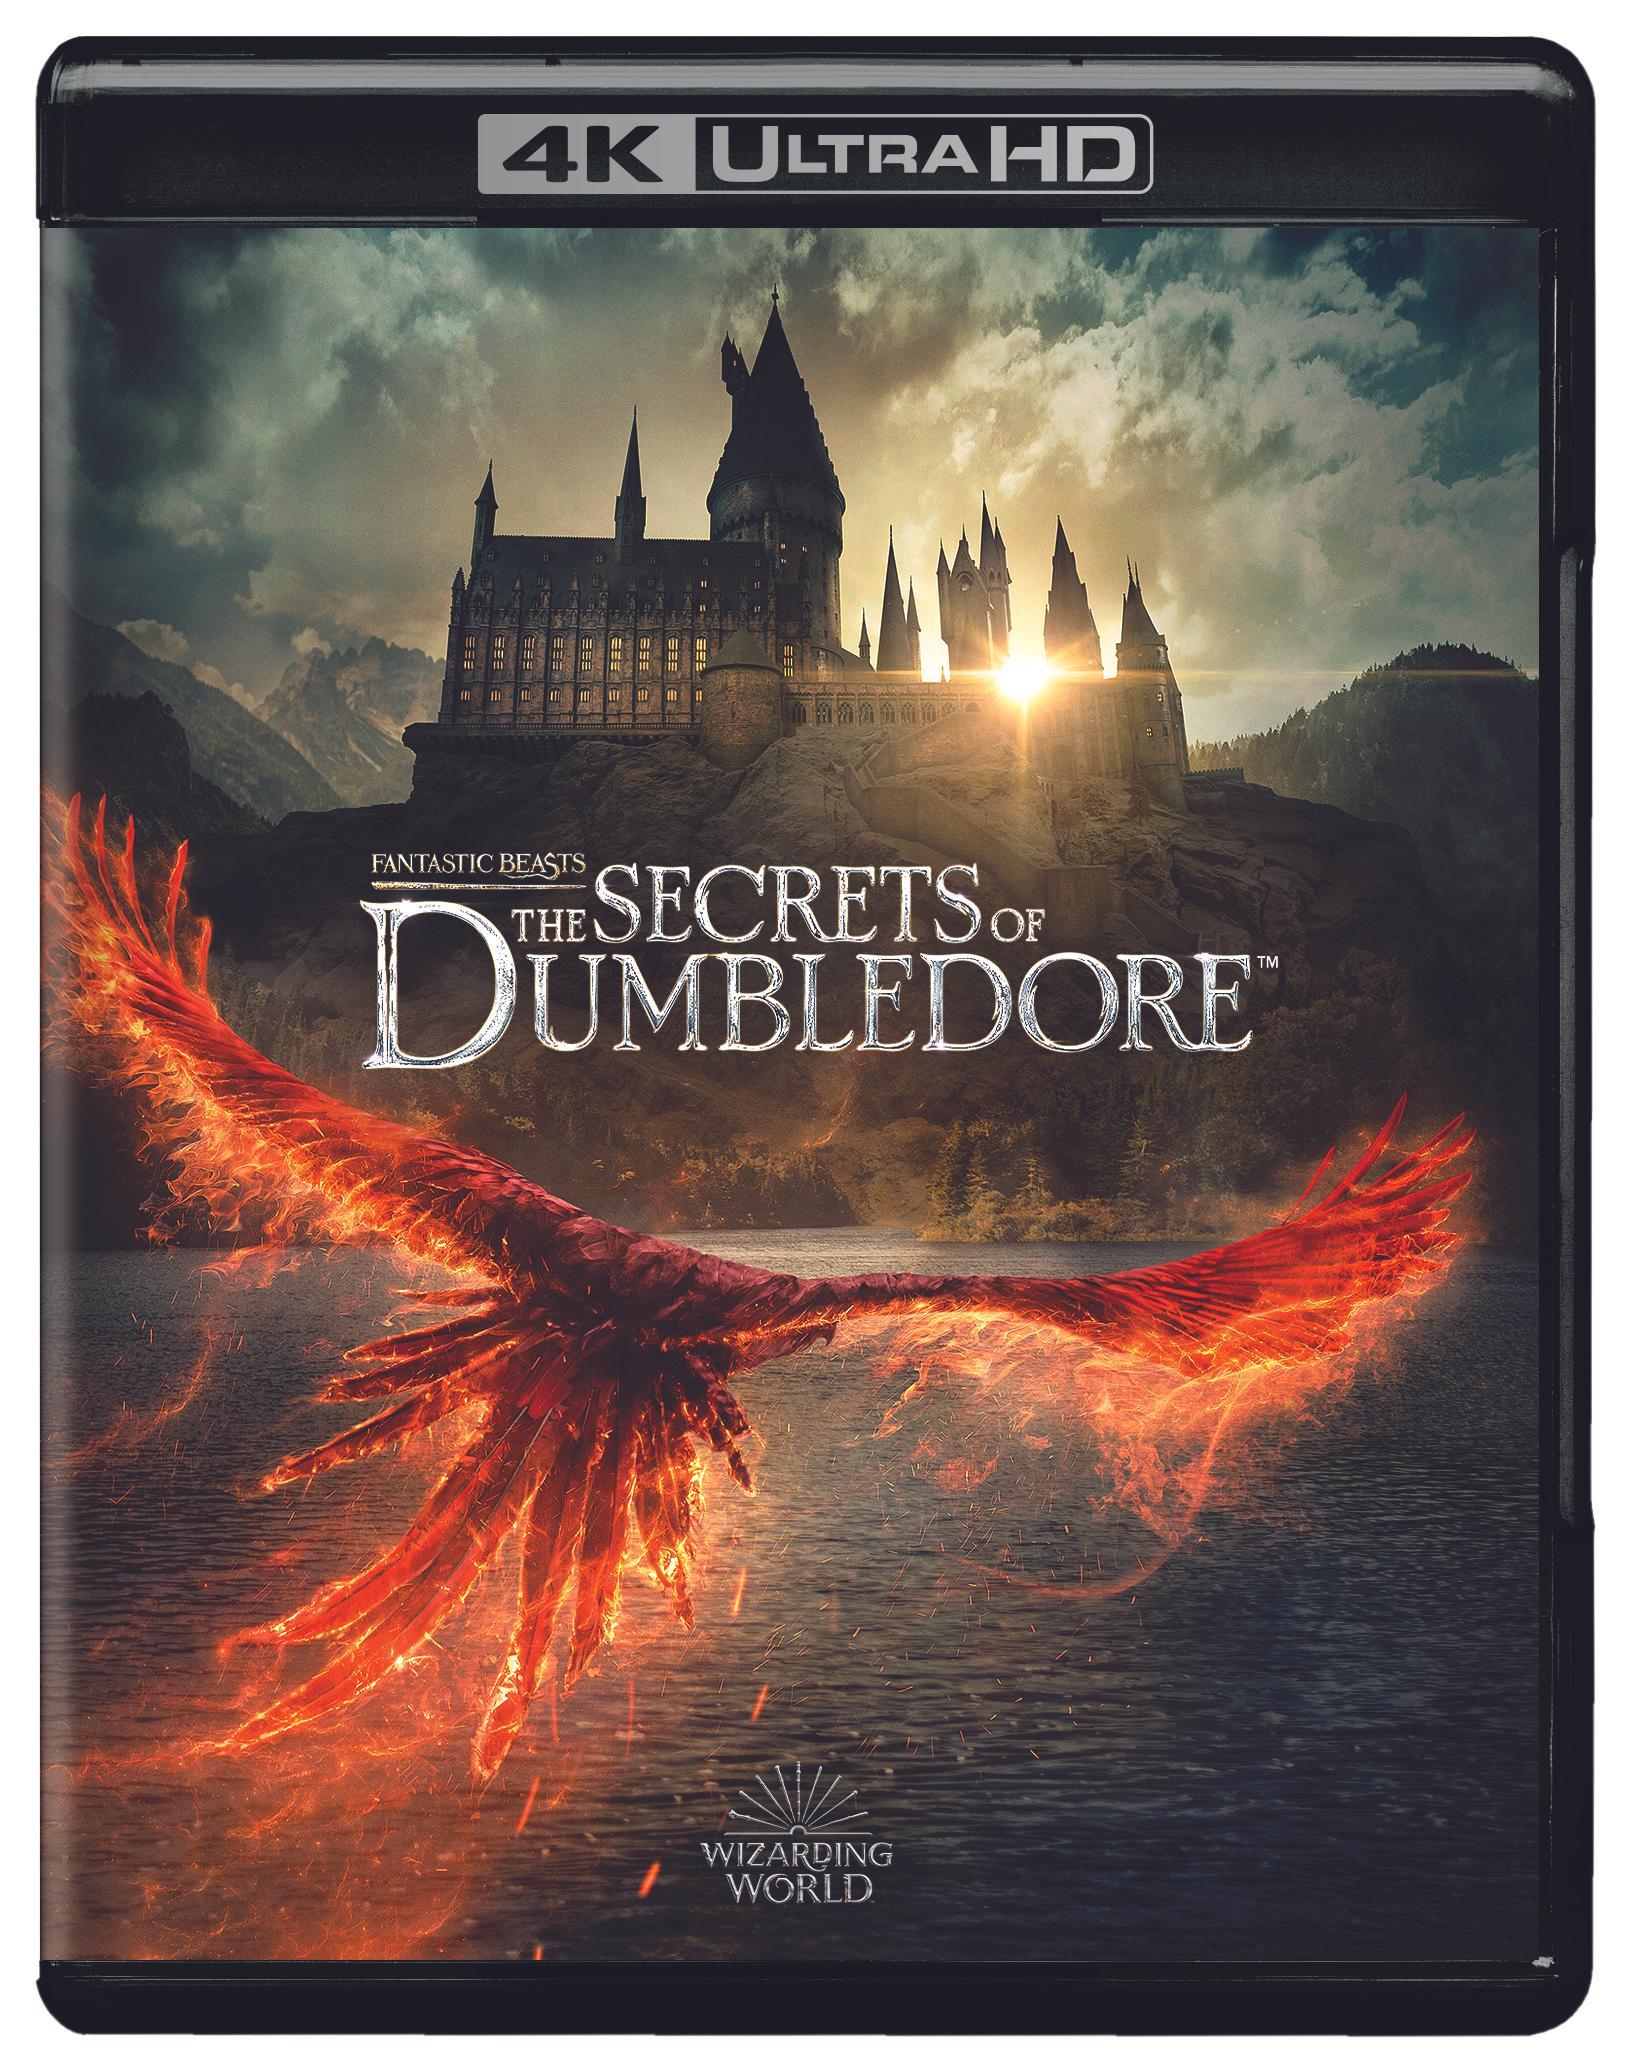 Fantastic Beasts: The Secrets Of Dumbledore (Includes Blu-ray) - UHD [ 2022 ]  - Adventure Movies On 4K Ultra HD Blu-ray - Movies On GRUV